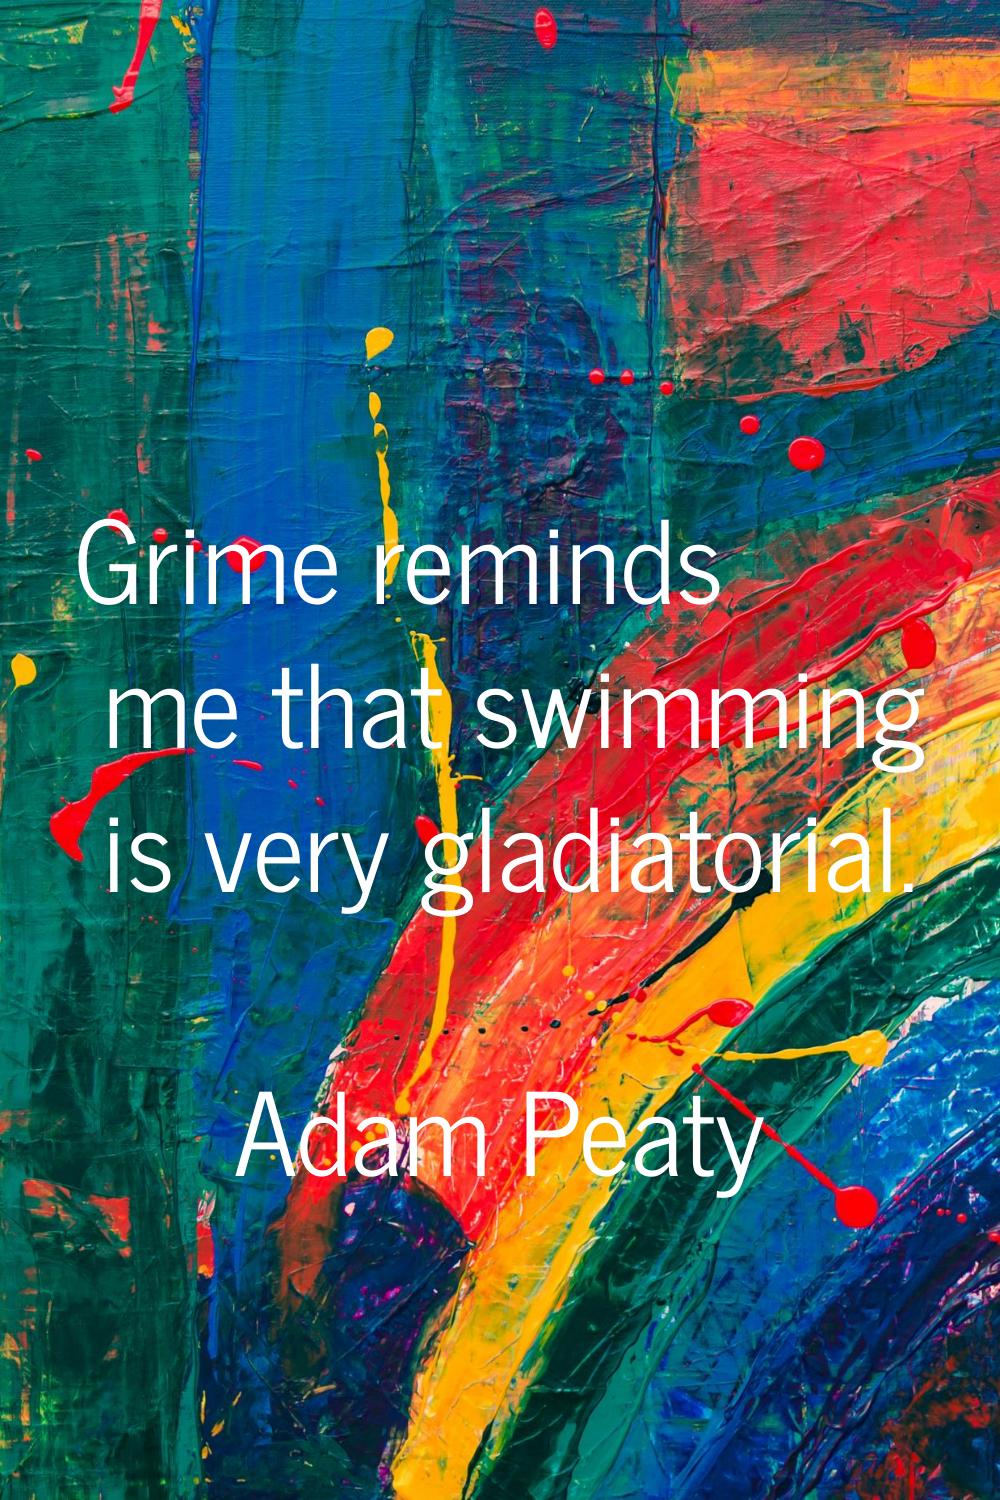 Grime reminds me that swimming is very gladiatorial.